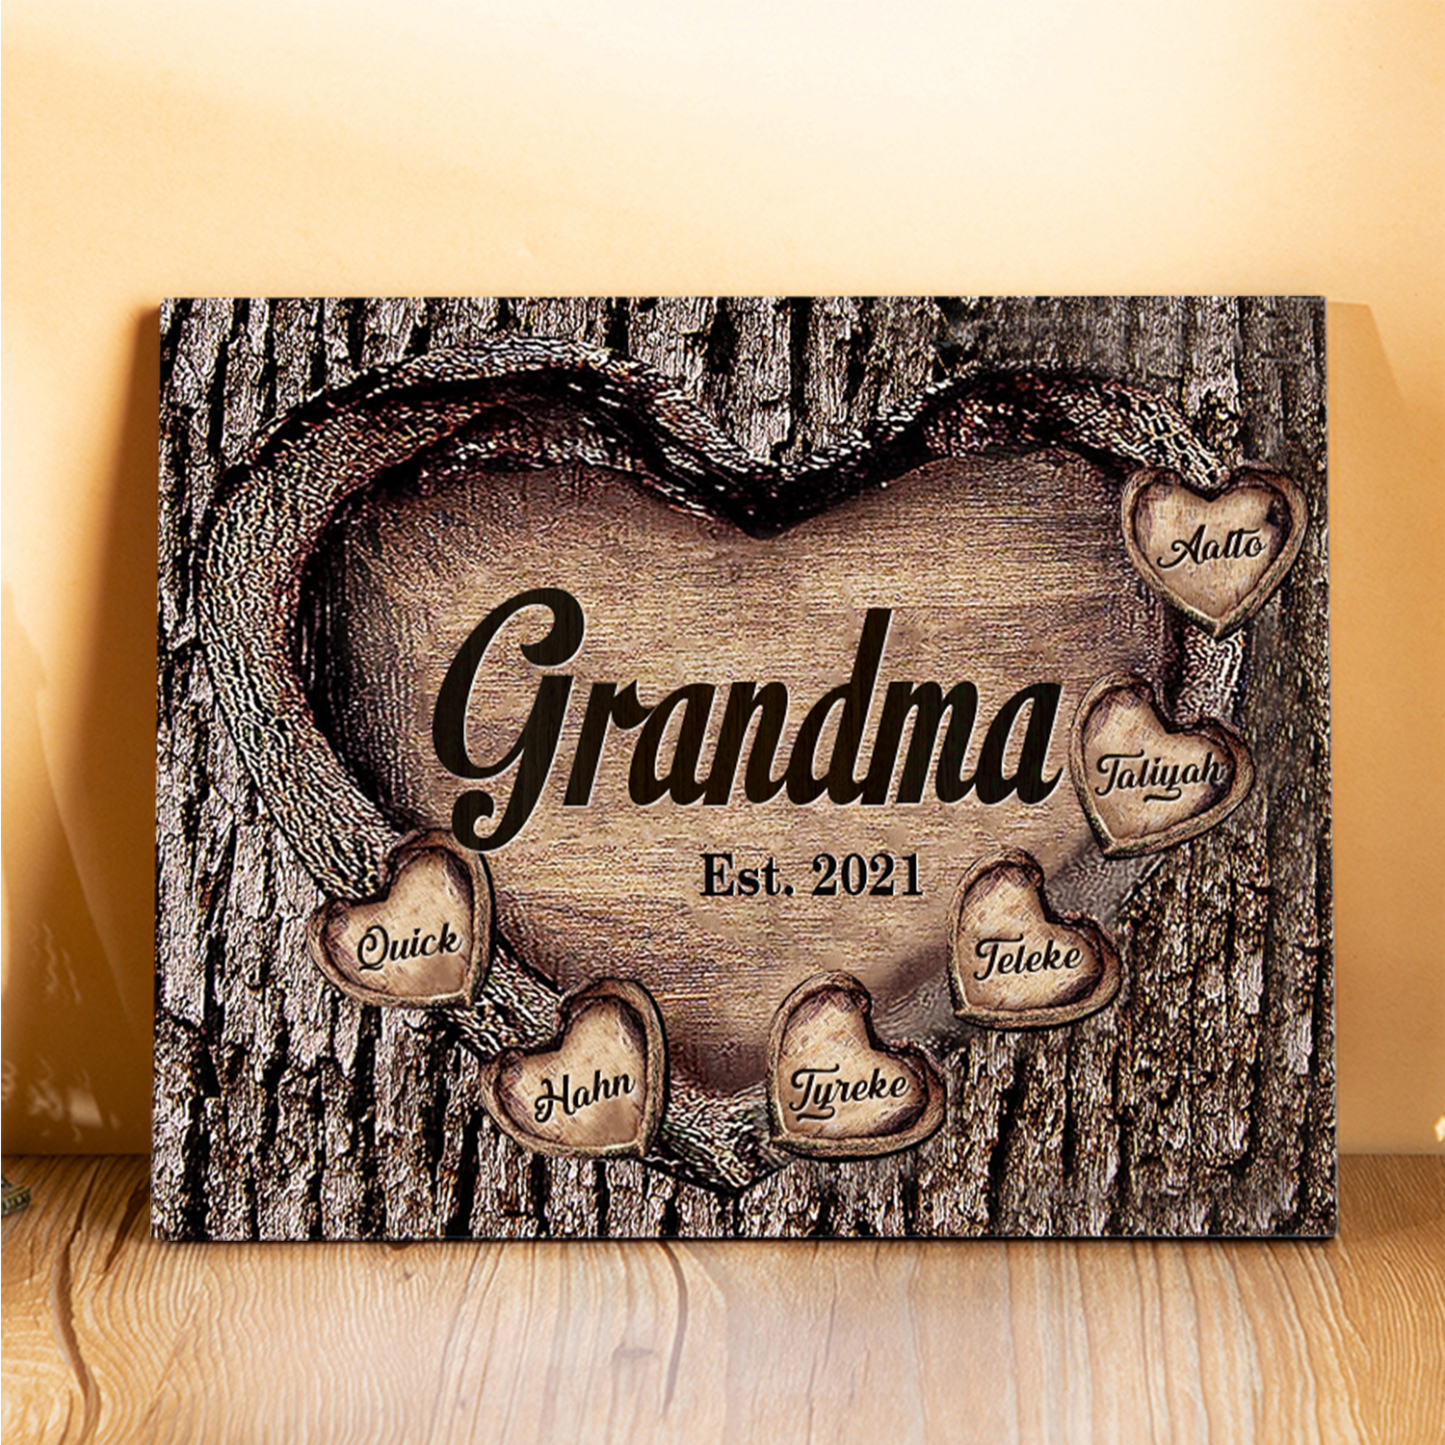 6 Names-Personalized Nana Wooden Ornament Custom Text And Date Home Decoration for Family